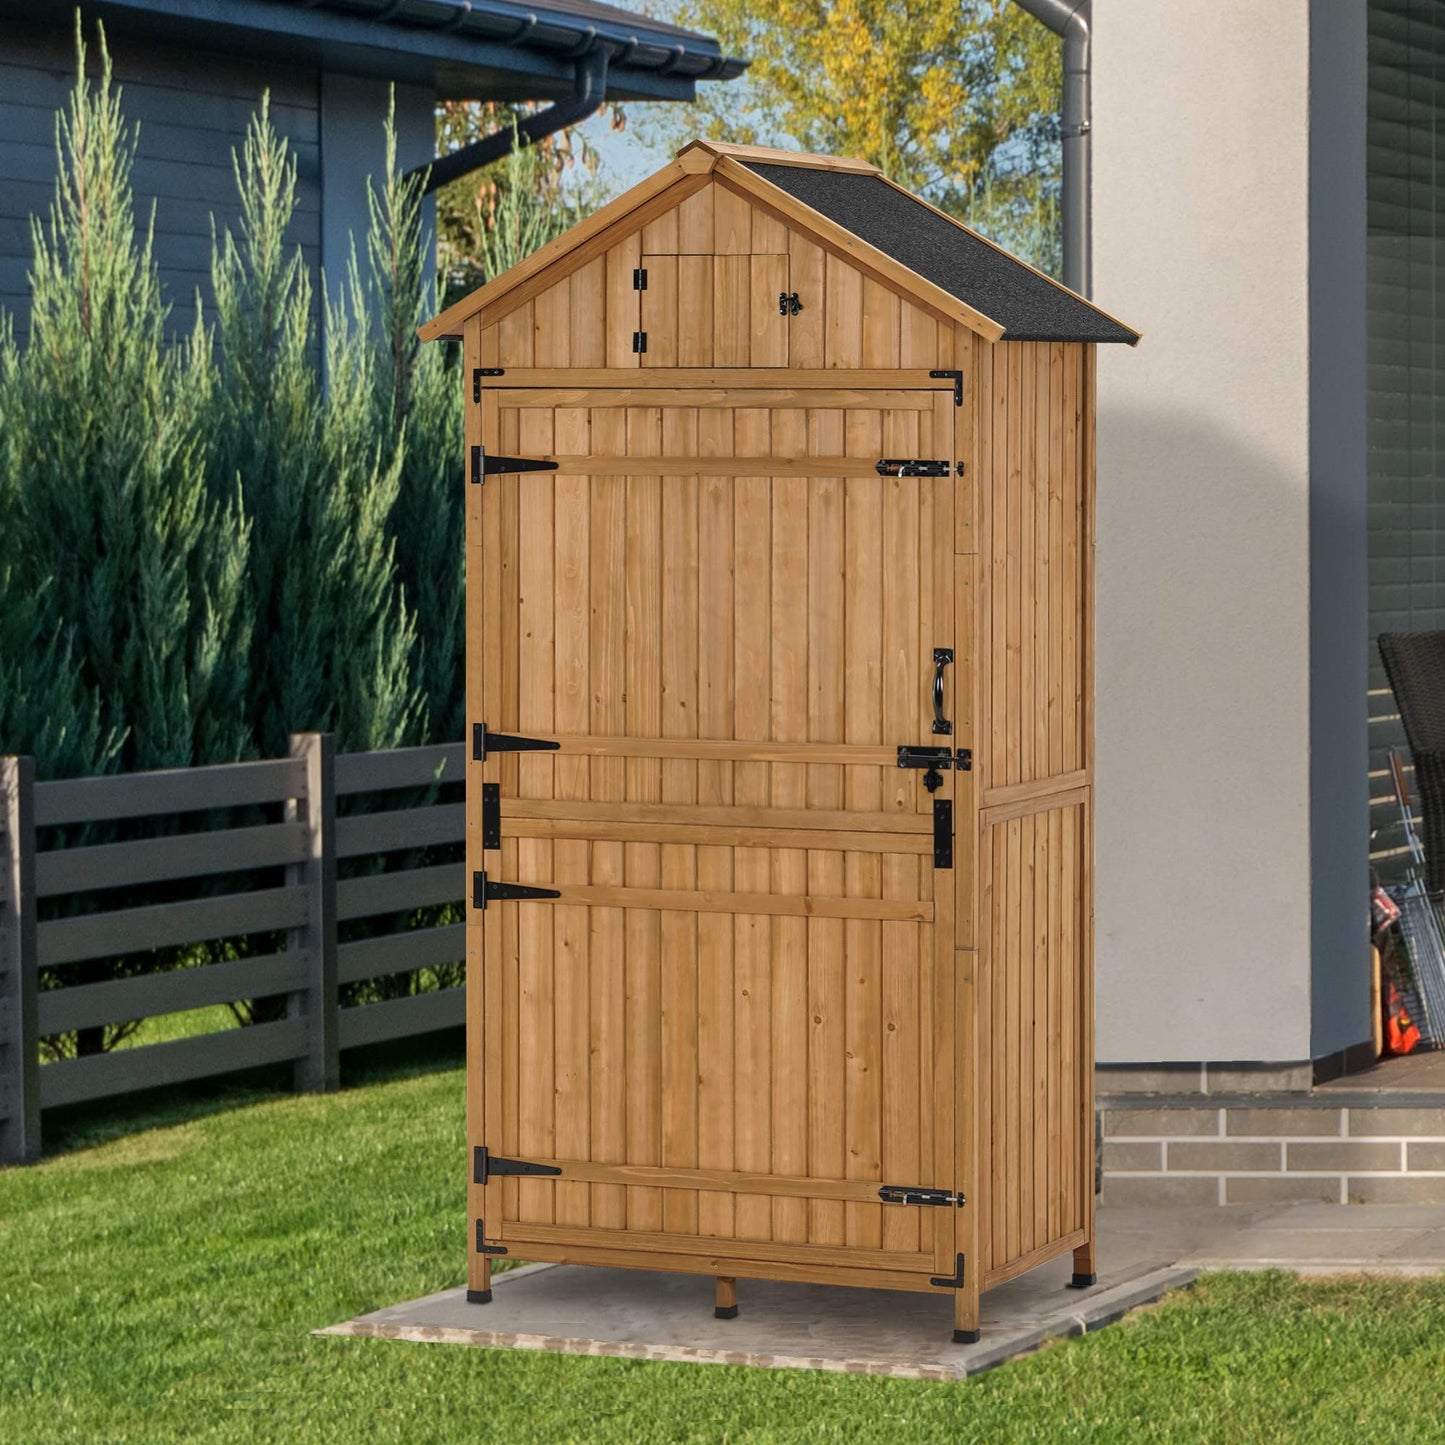 MCombo Large Outdoor Storage Shed with Adjustable Shelves, Outdoor Storage Cabinet with Lock, Wood Garden Tool Shed for Outside, Backyard and Patio (38x24x82 inch) 6056-1970 (Natural)